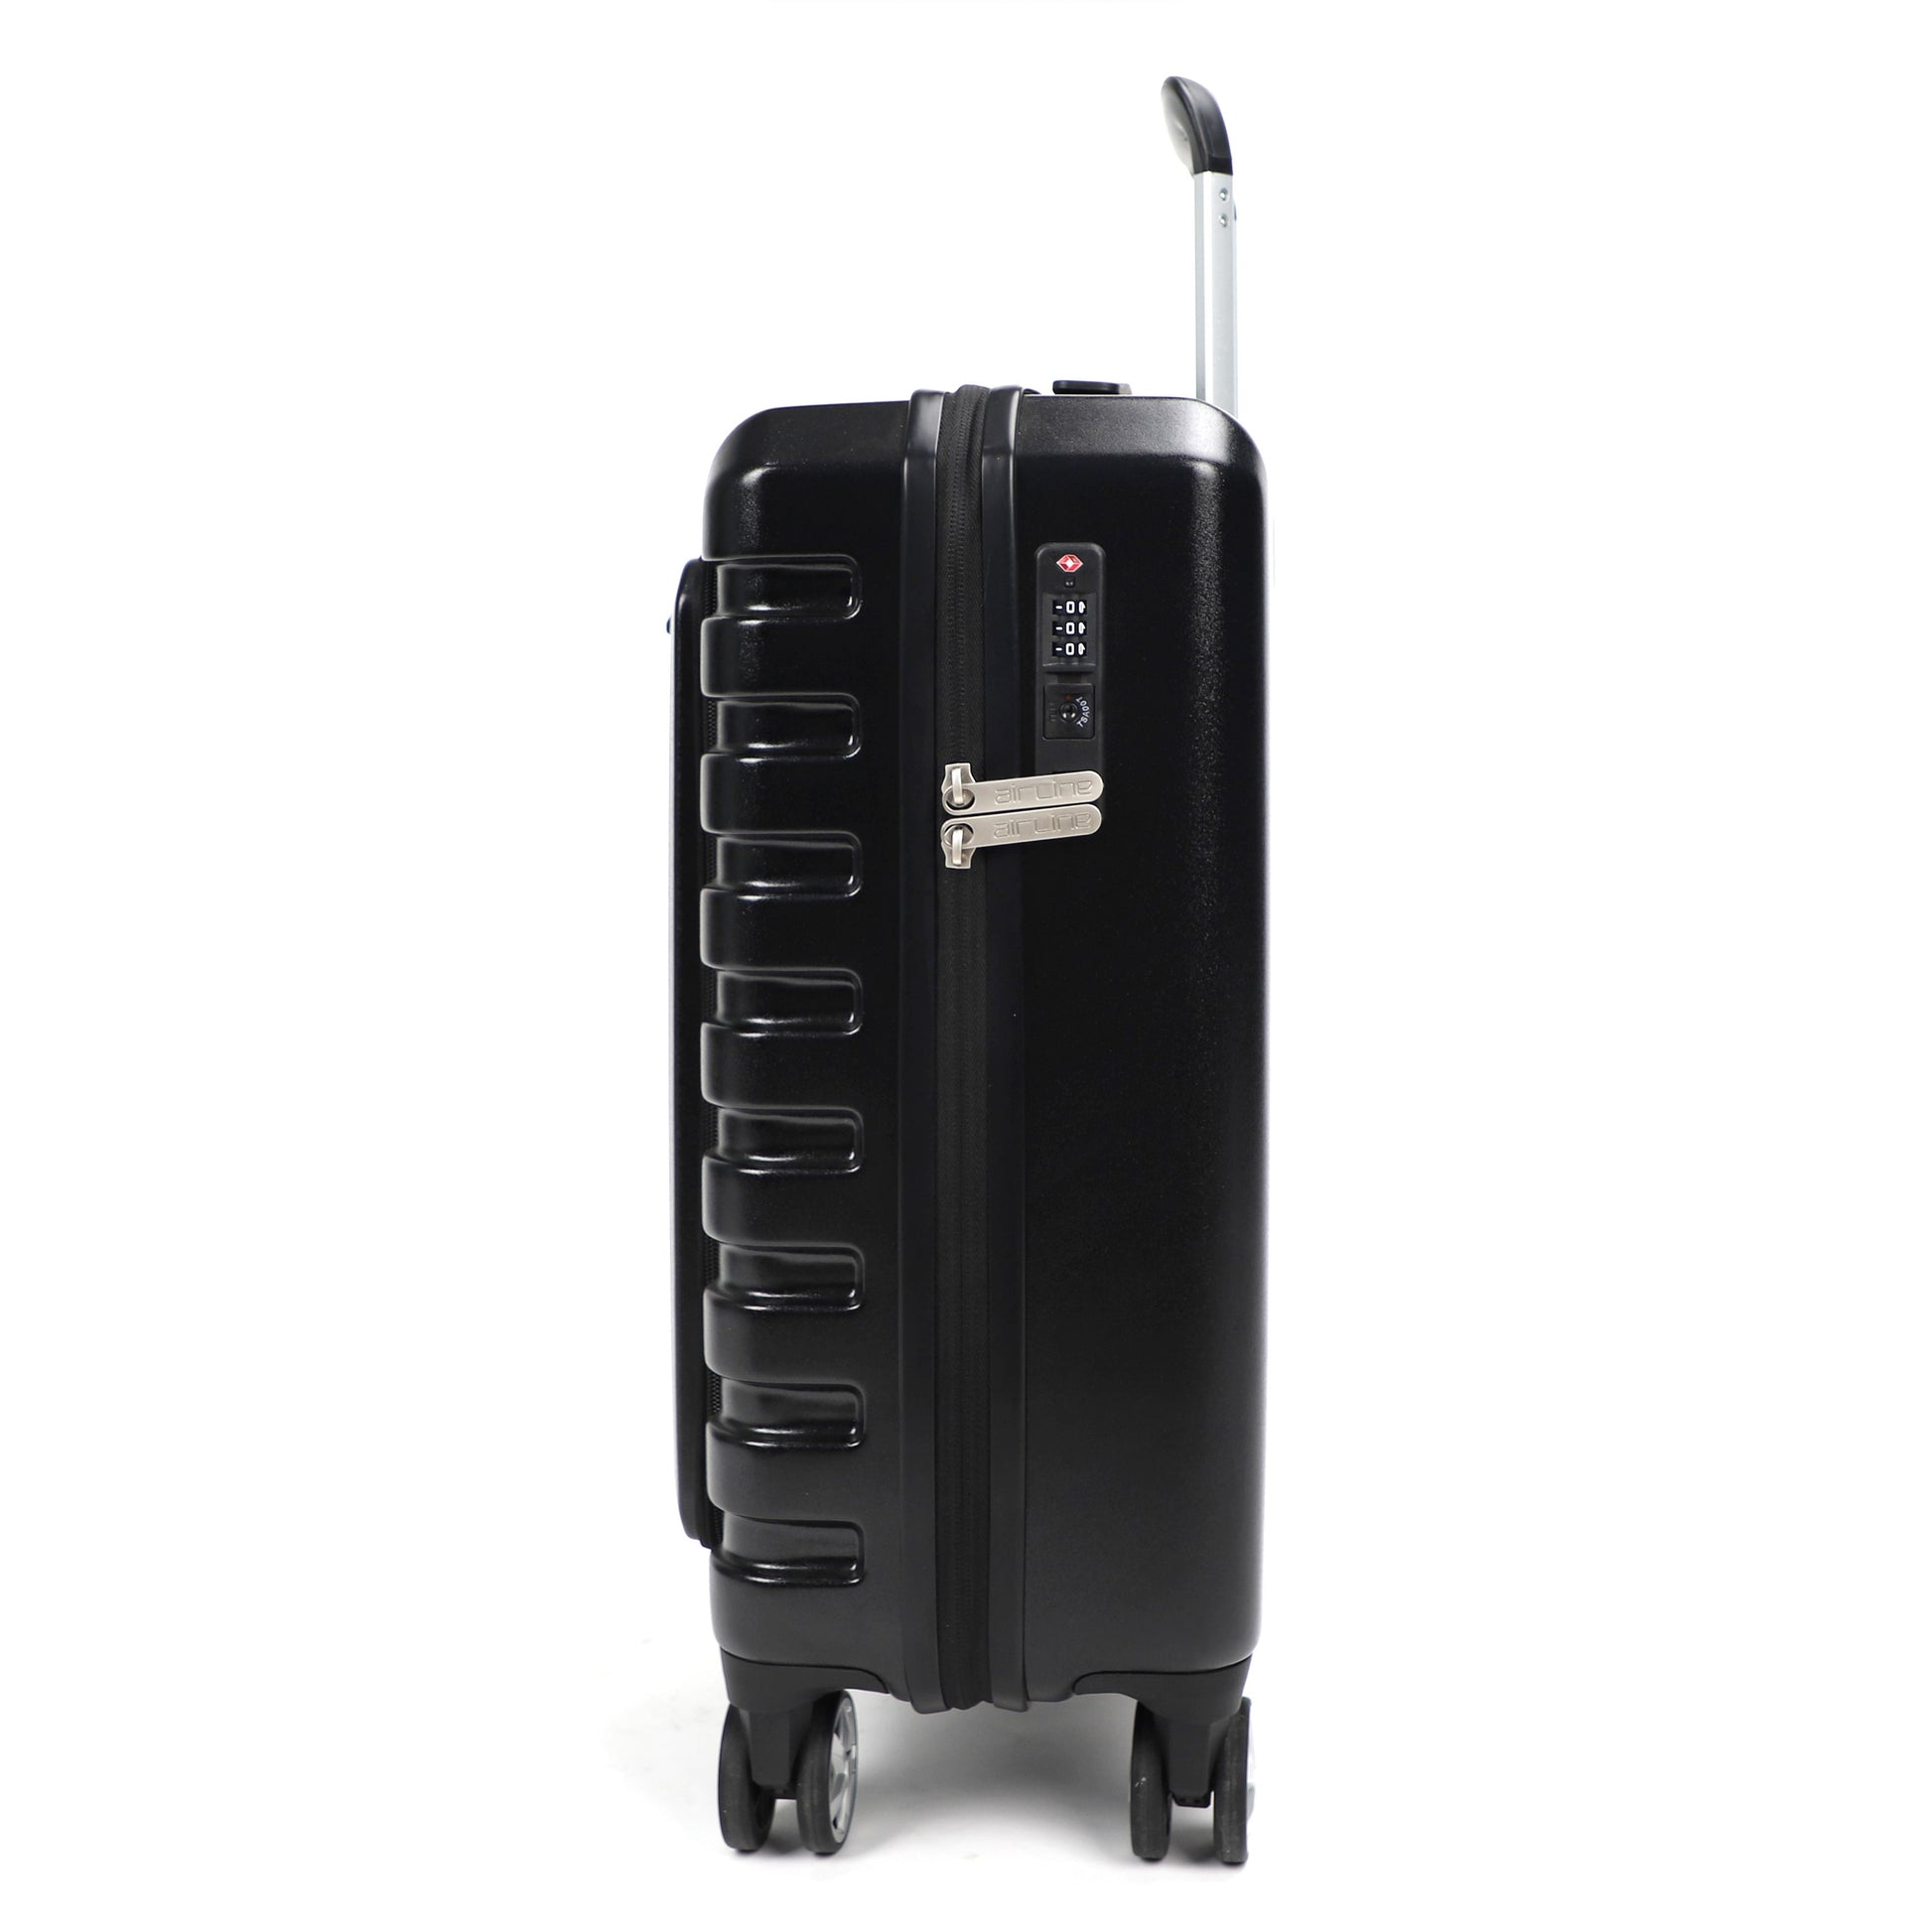 Airline_Carry_On_Luggage_Black_right_view_T1978155001